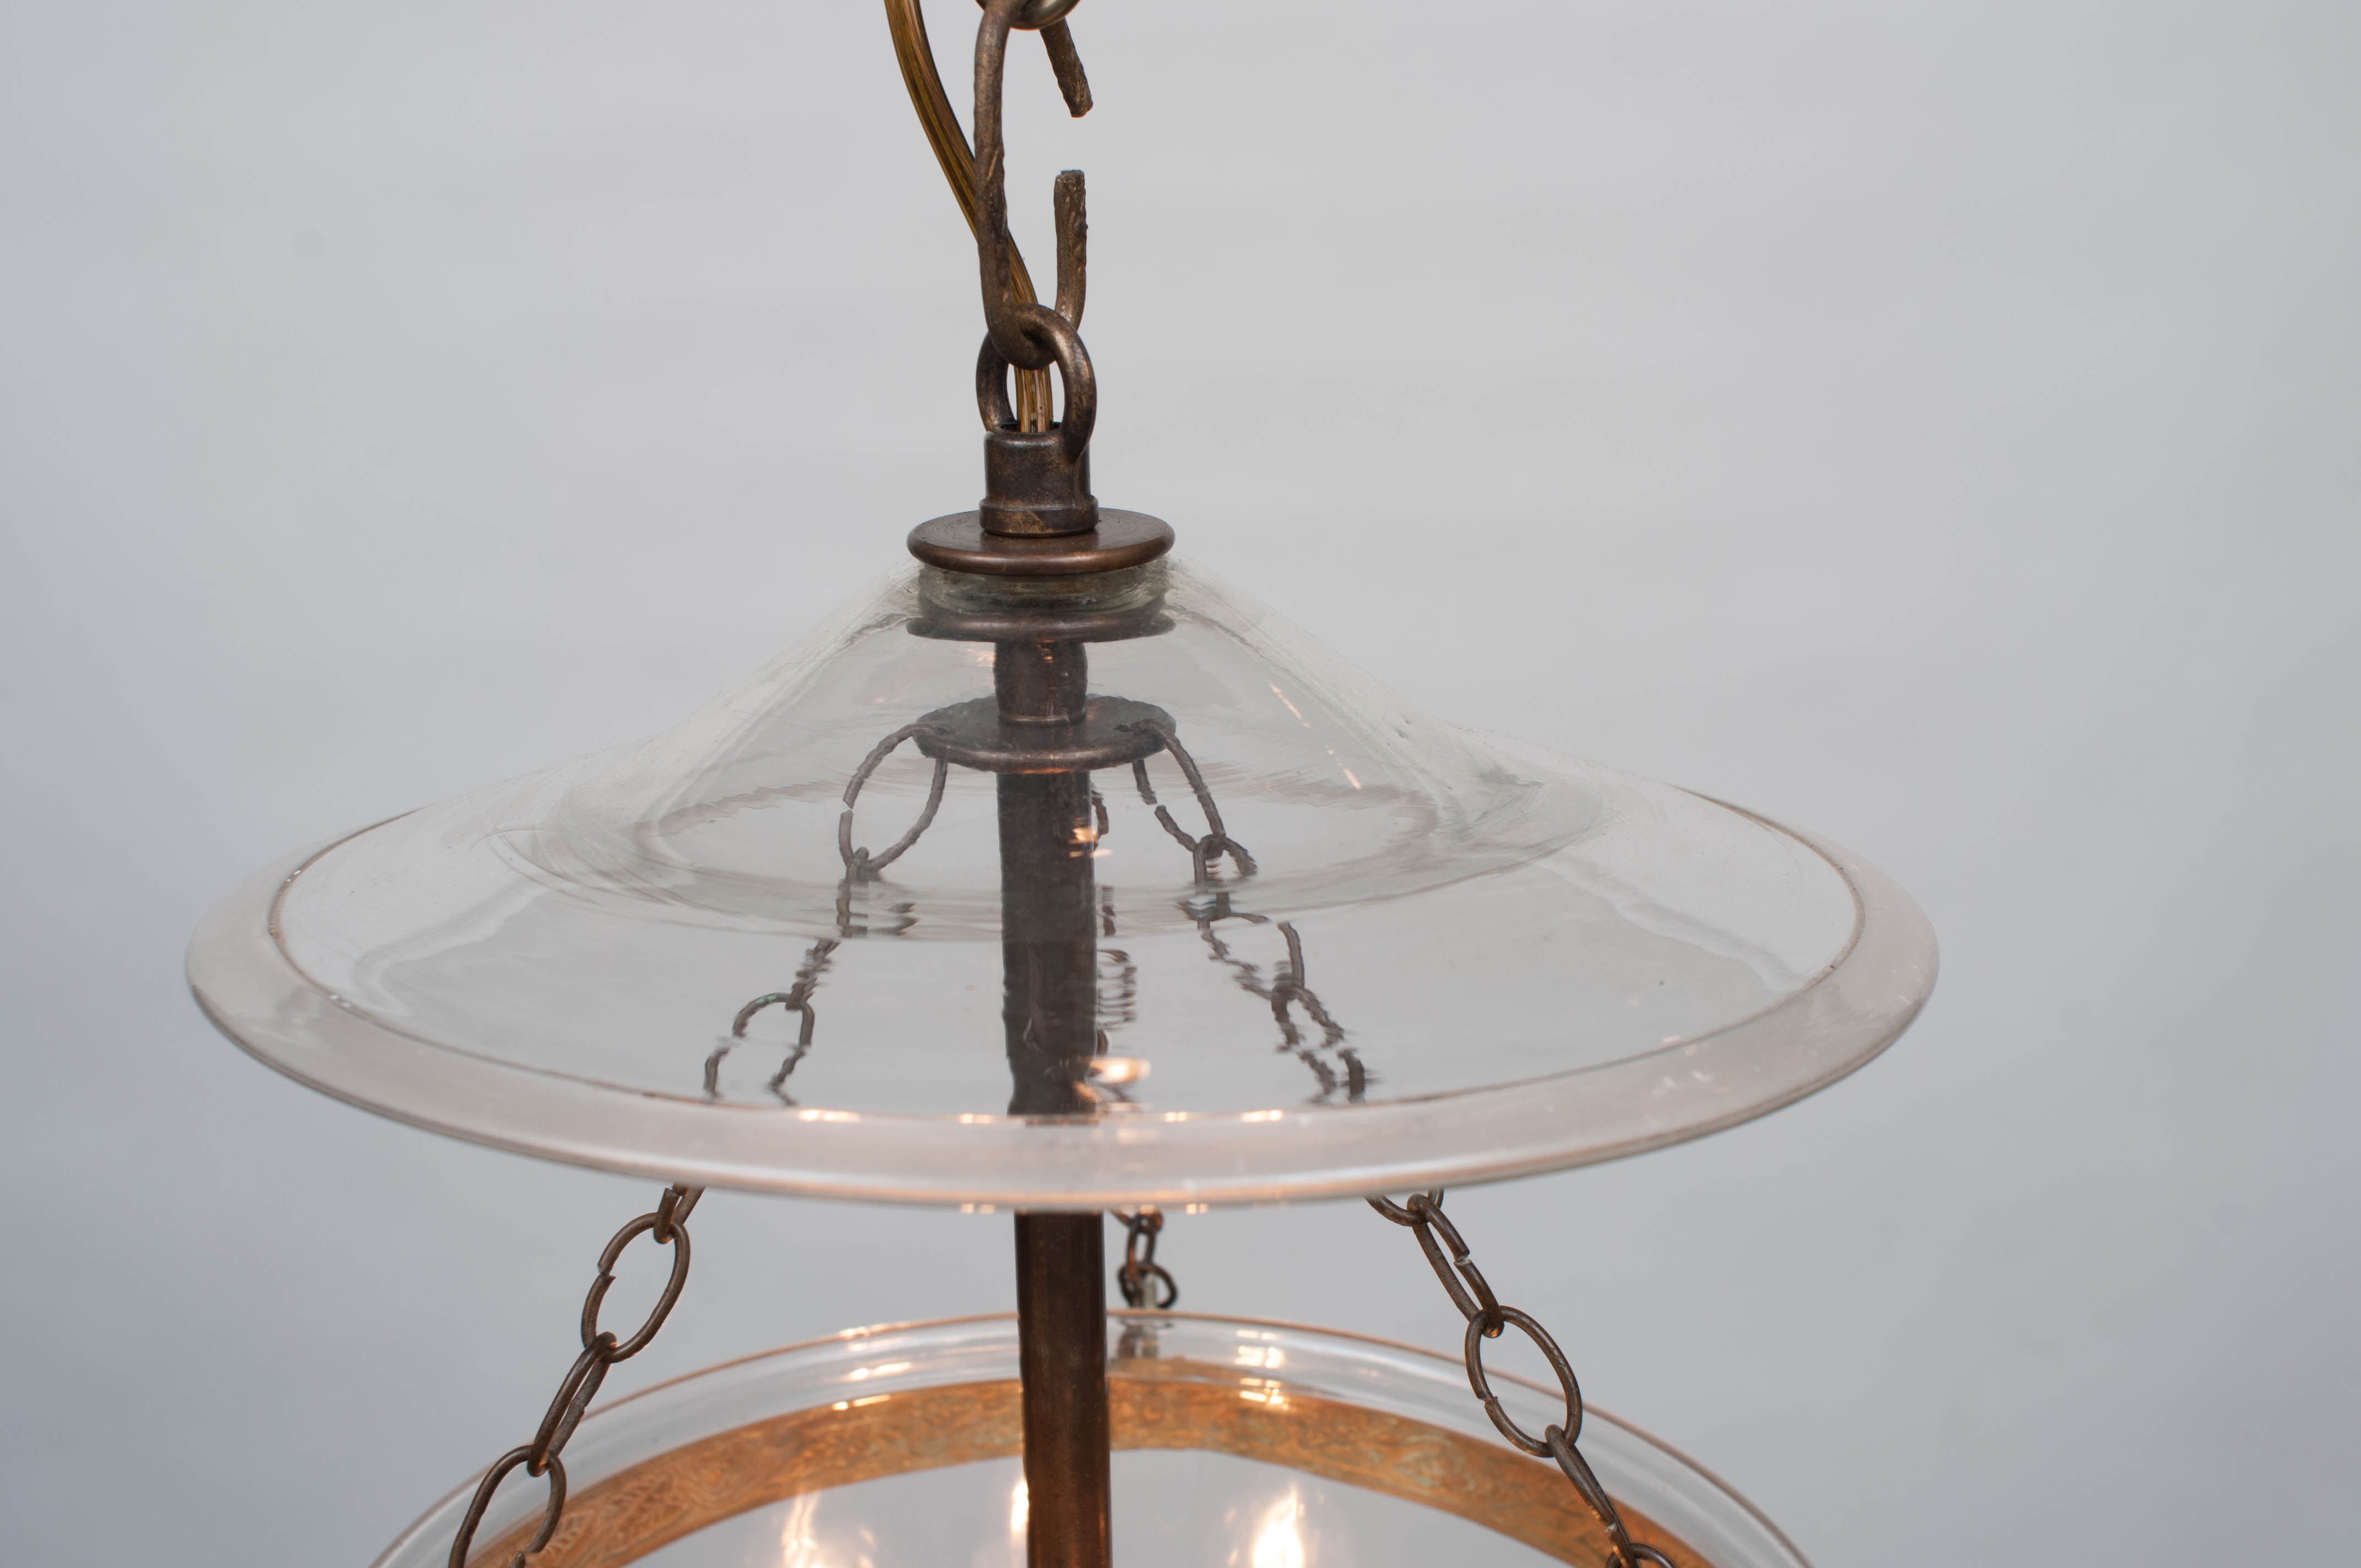 Ormolu mounting - hand blown bell and smoke plate - etched glass in star pattern - aged brass shaft in center with three lights - height may be adjusted - includes hanging hardware and appropriate ceiling cap and chain.